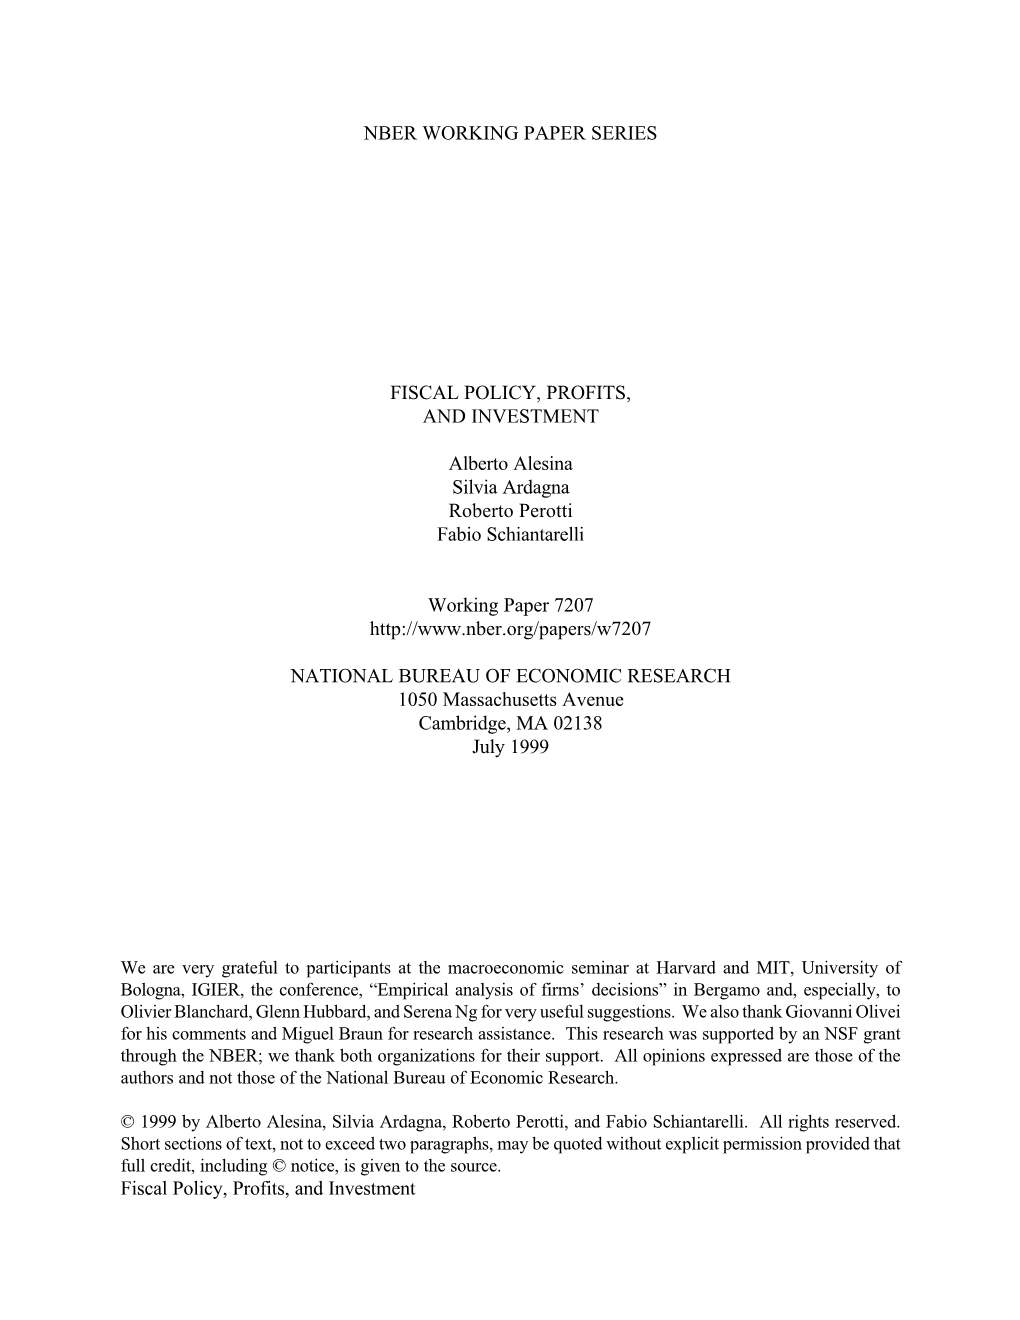 Nber Working Paper Series Fiscal Policy, Profits, And